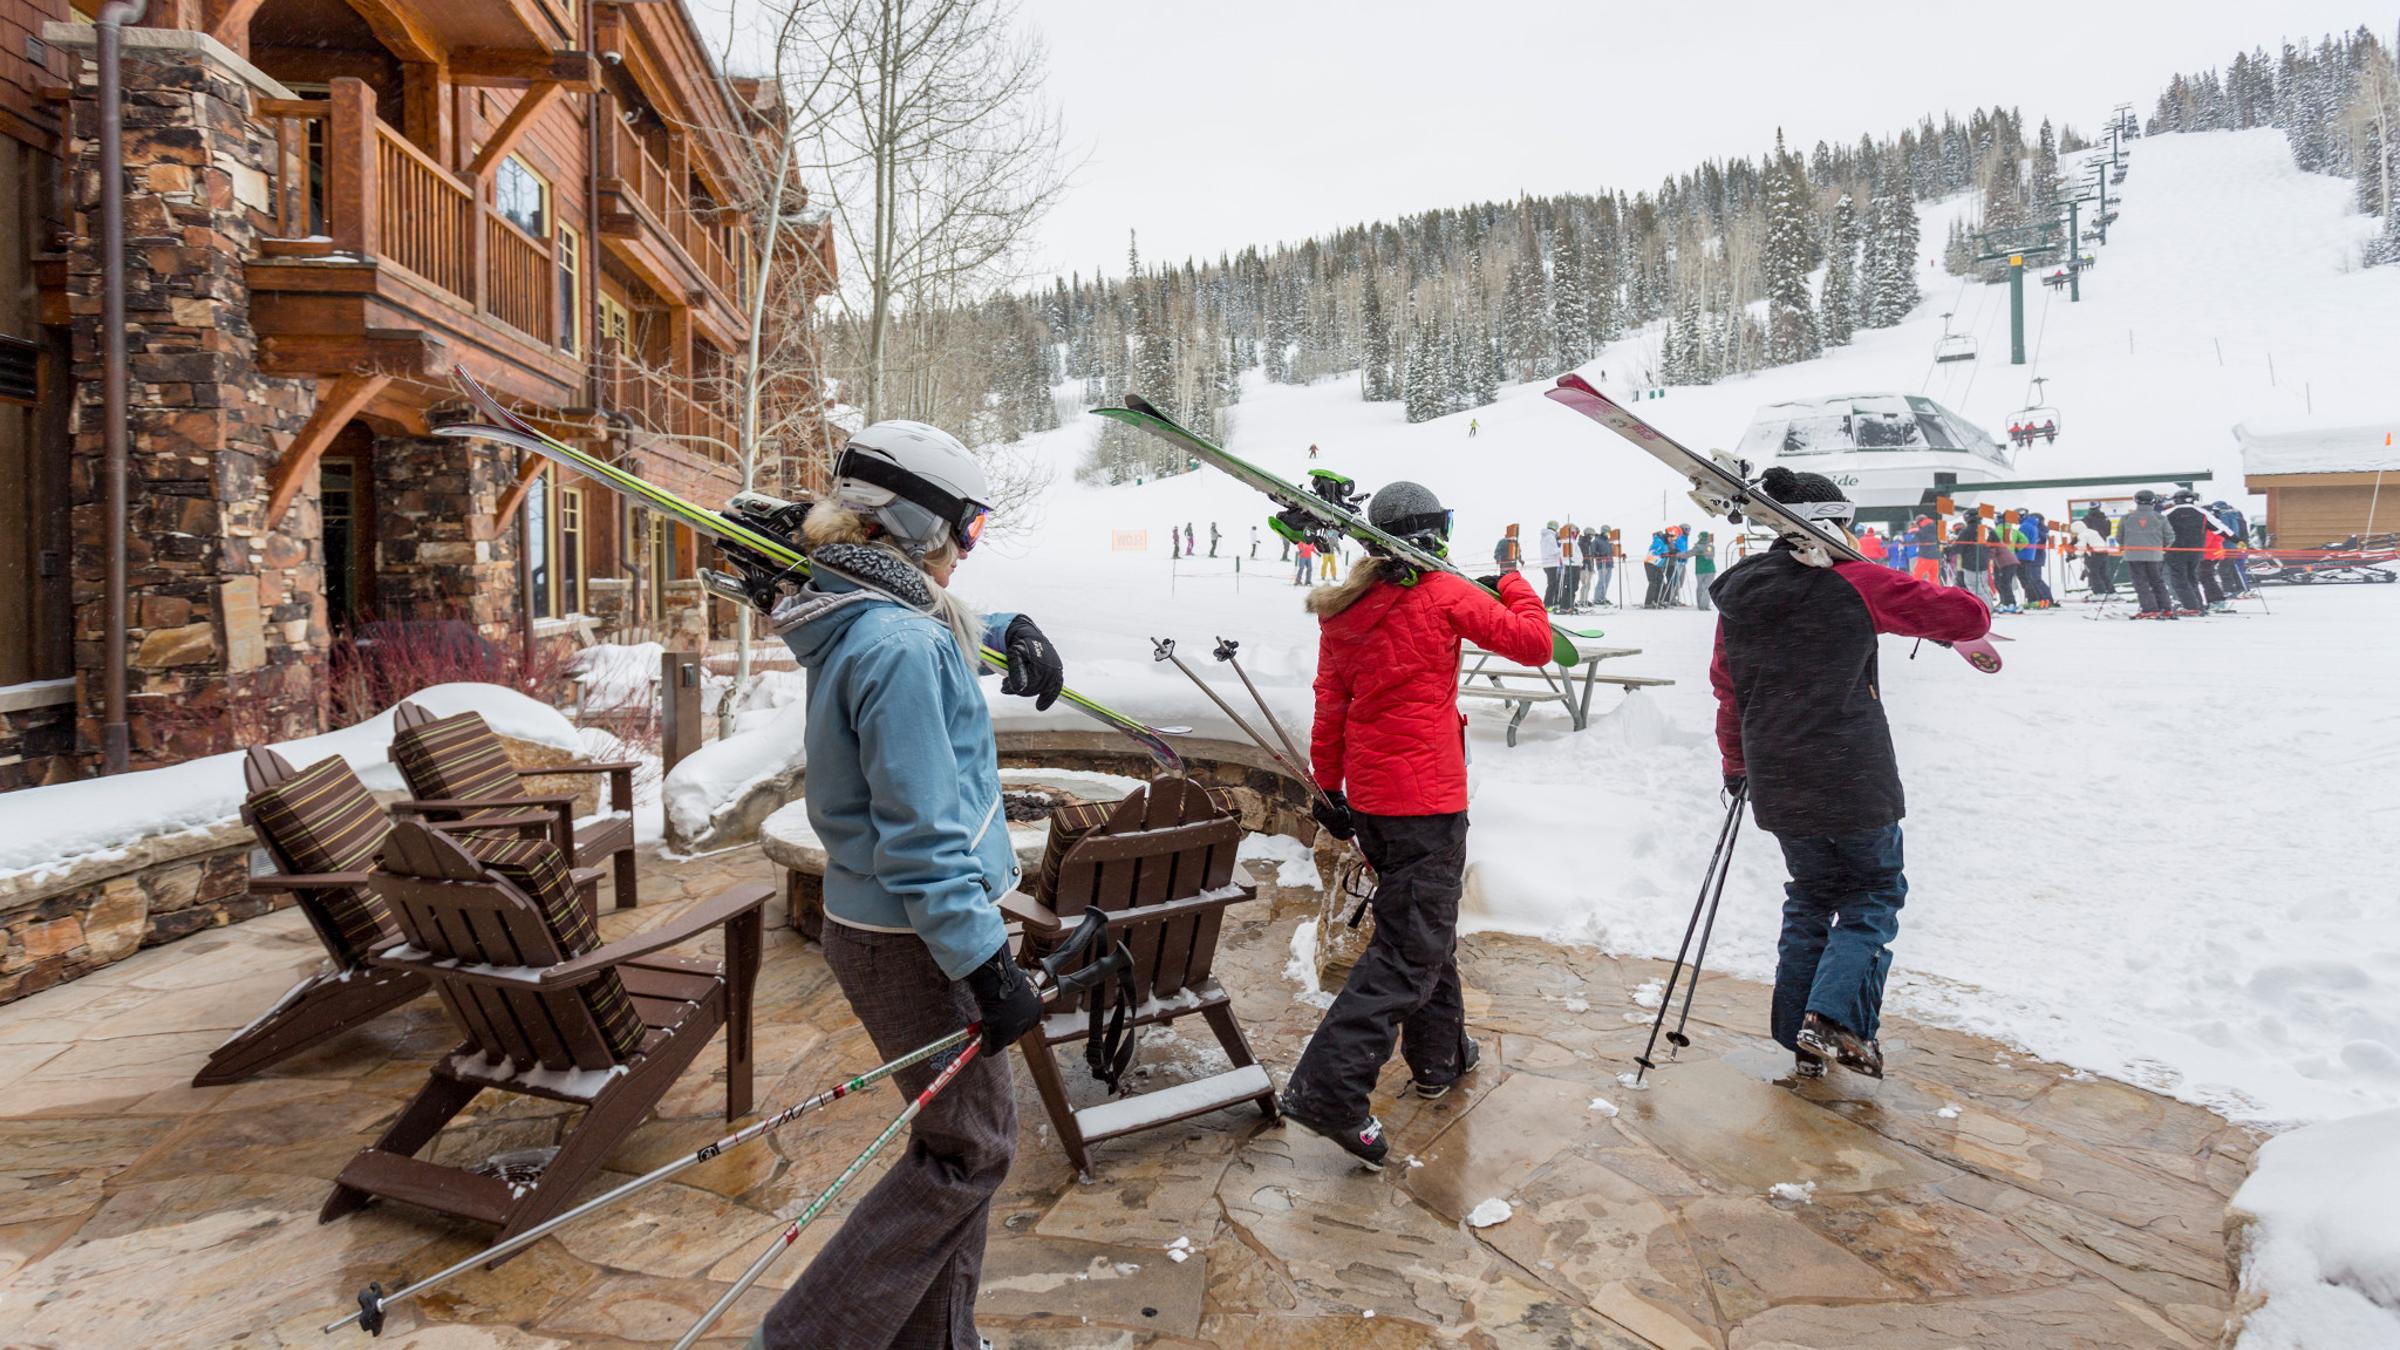 Three guests walking out from The Grand Lodge with their skis to go skiing